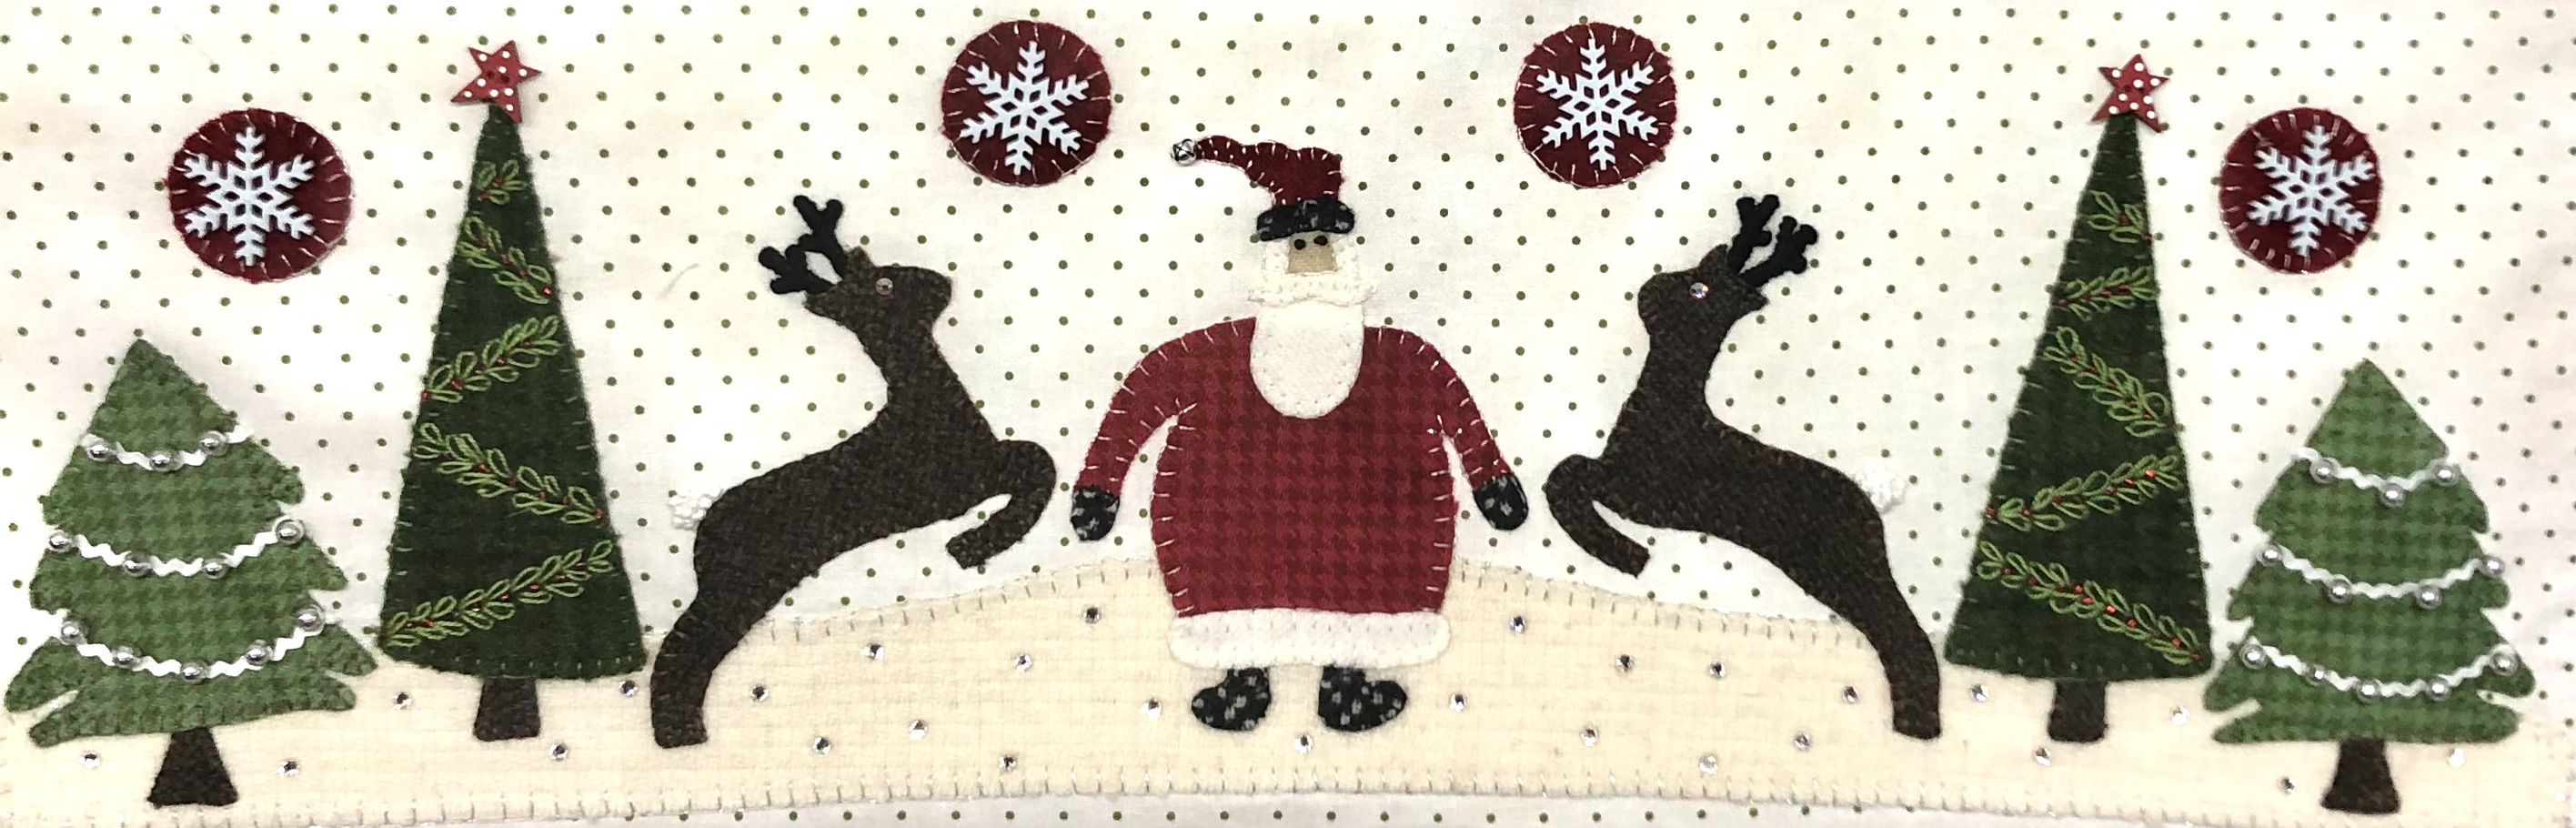 Mary Jane & Friends - The Countdown to the Holidays Ladies -  BORDER BLOCK 2 - SANTA'S ARRIVAL PRINTED PATTERN 